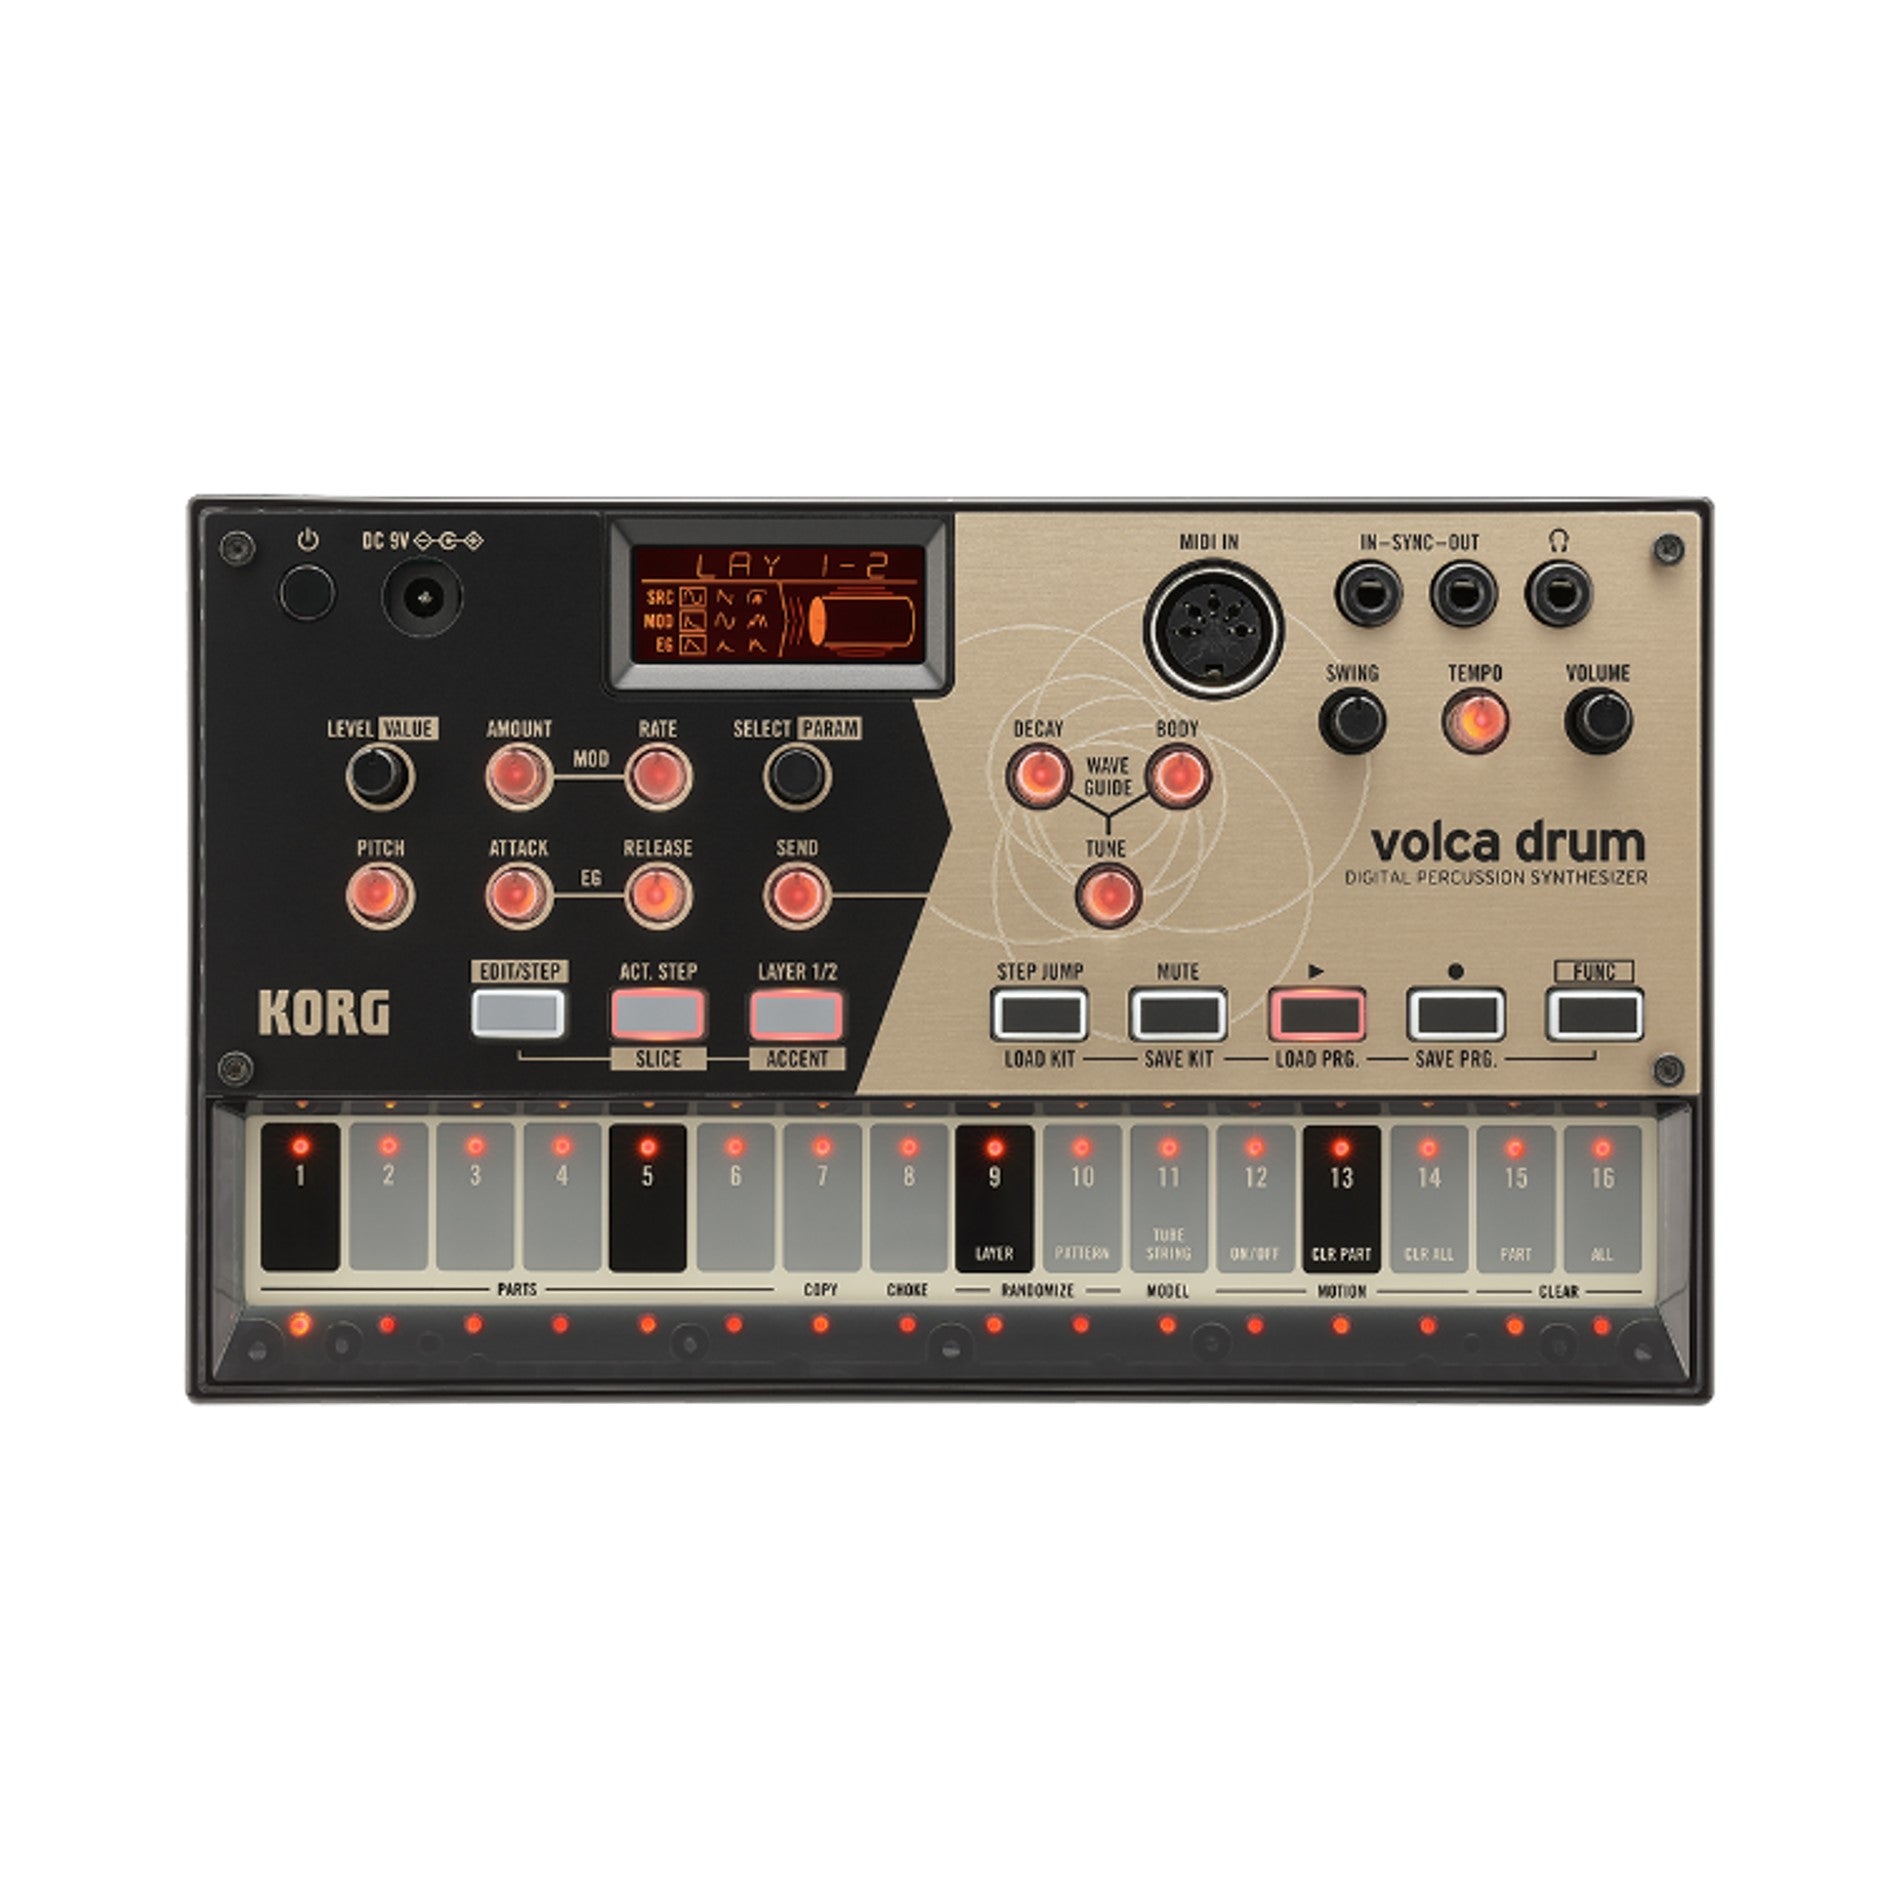 Korg volca drum - Digital Percussion Synthesizer